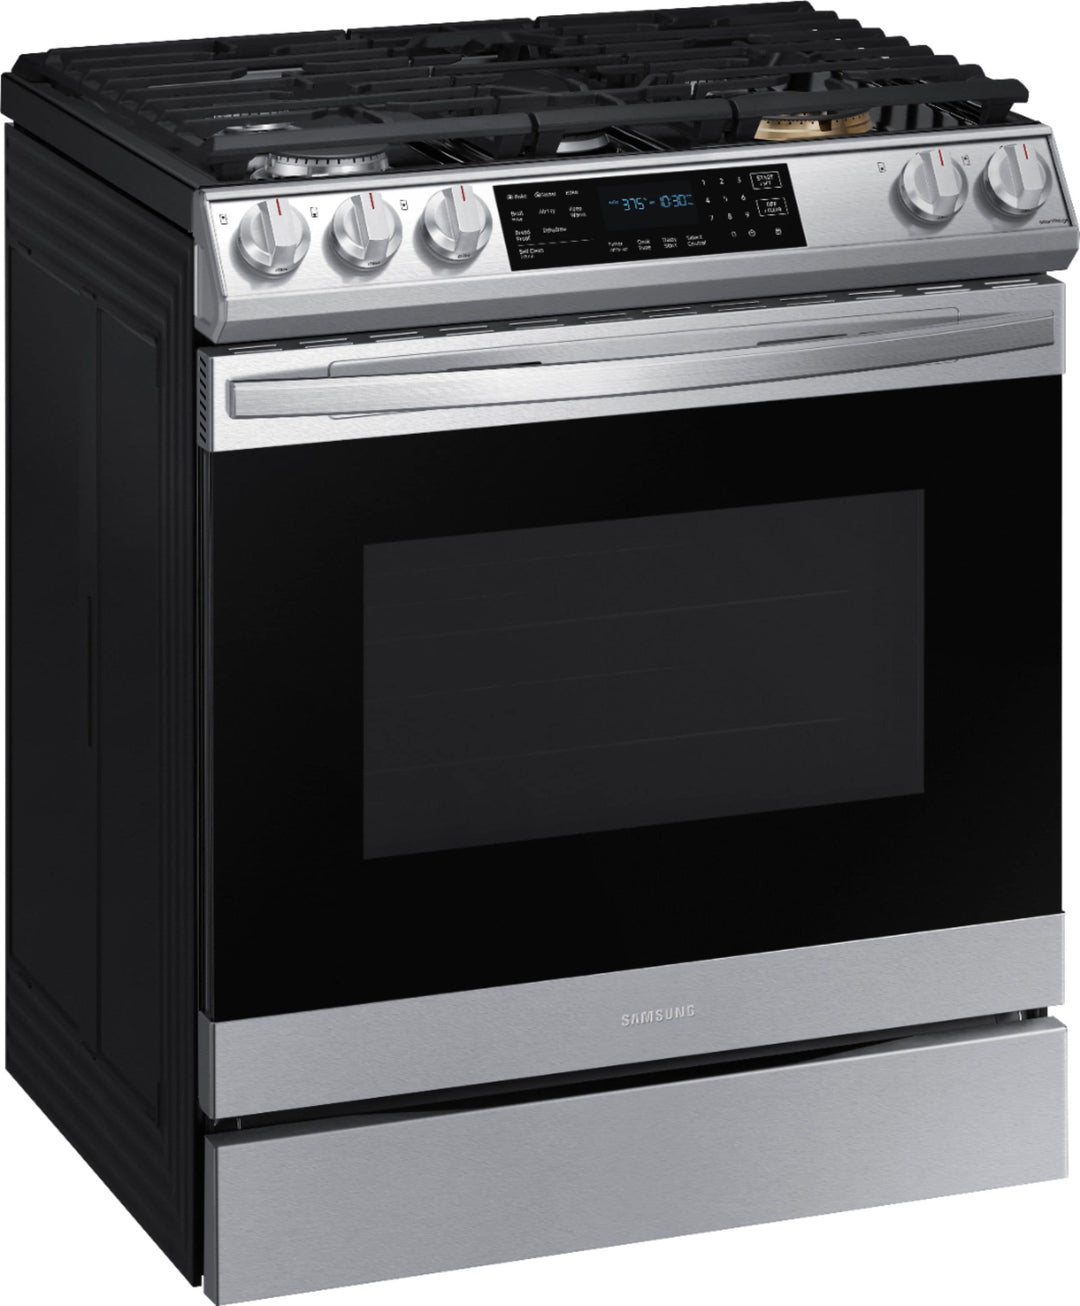 Samsung - 6.0 cu. ft. Front Control Slide-In Gas Convection Range with Air Fry & Wi-Fi, Fingerprint Resistant - Stainless steel_1